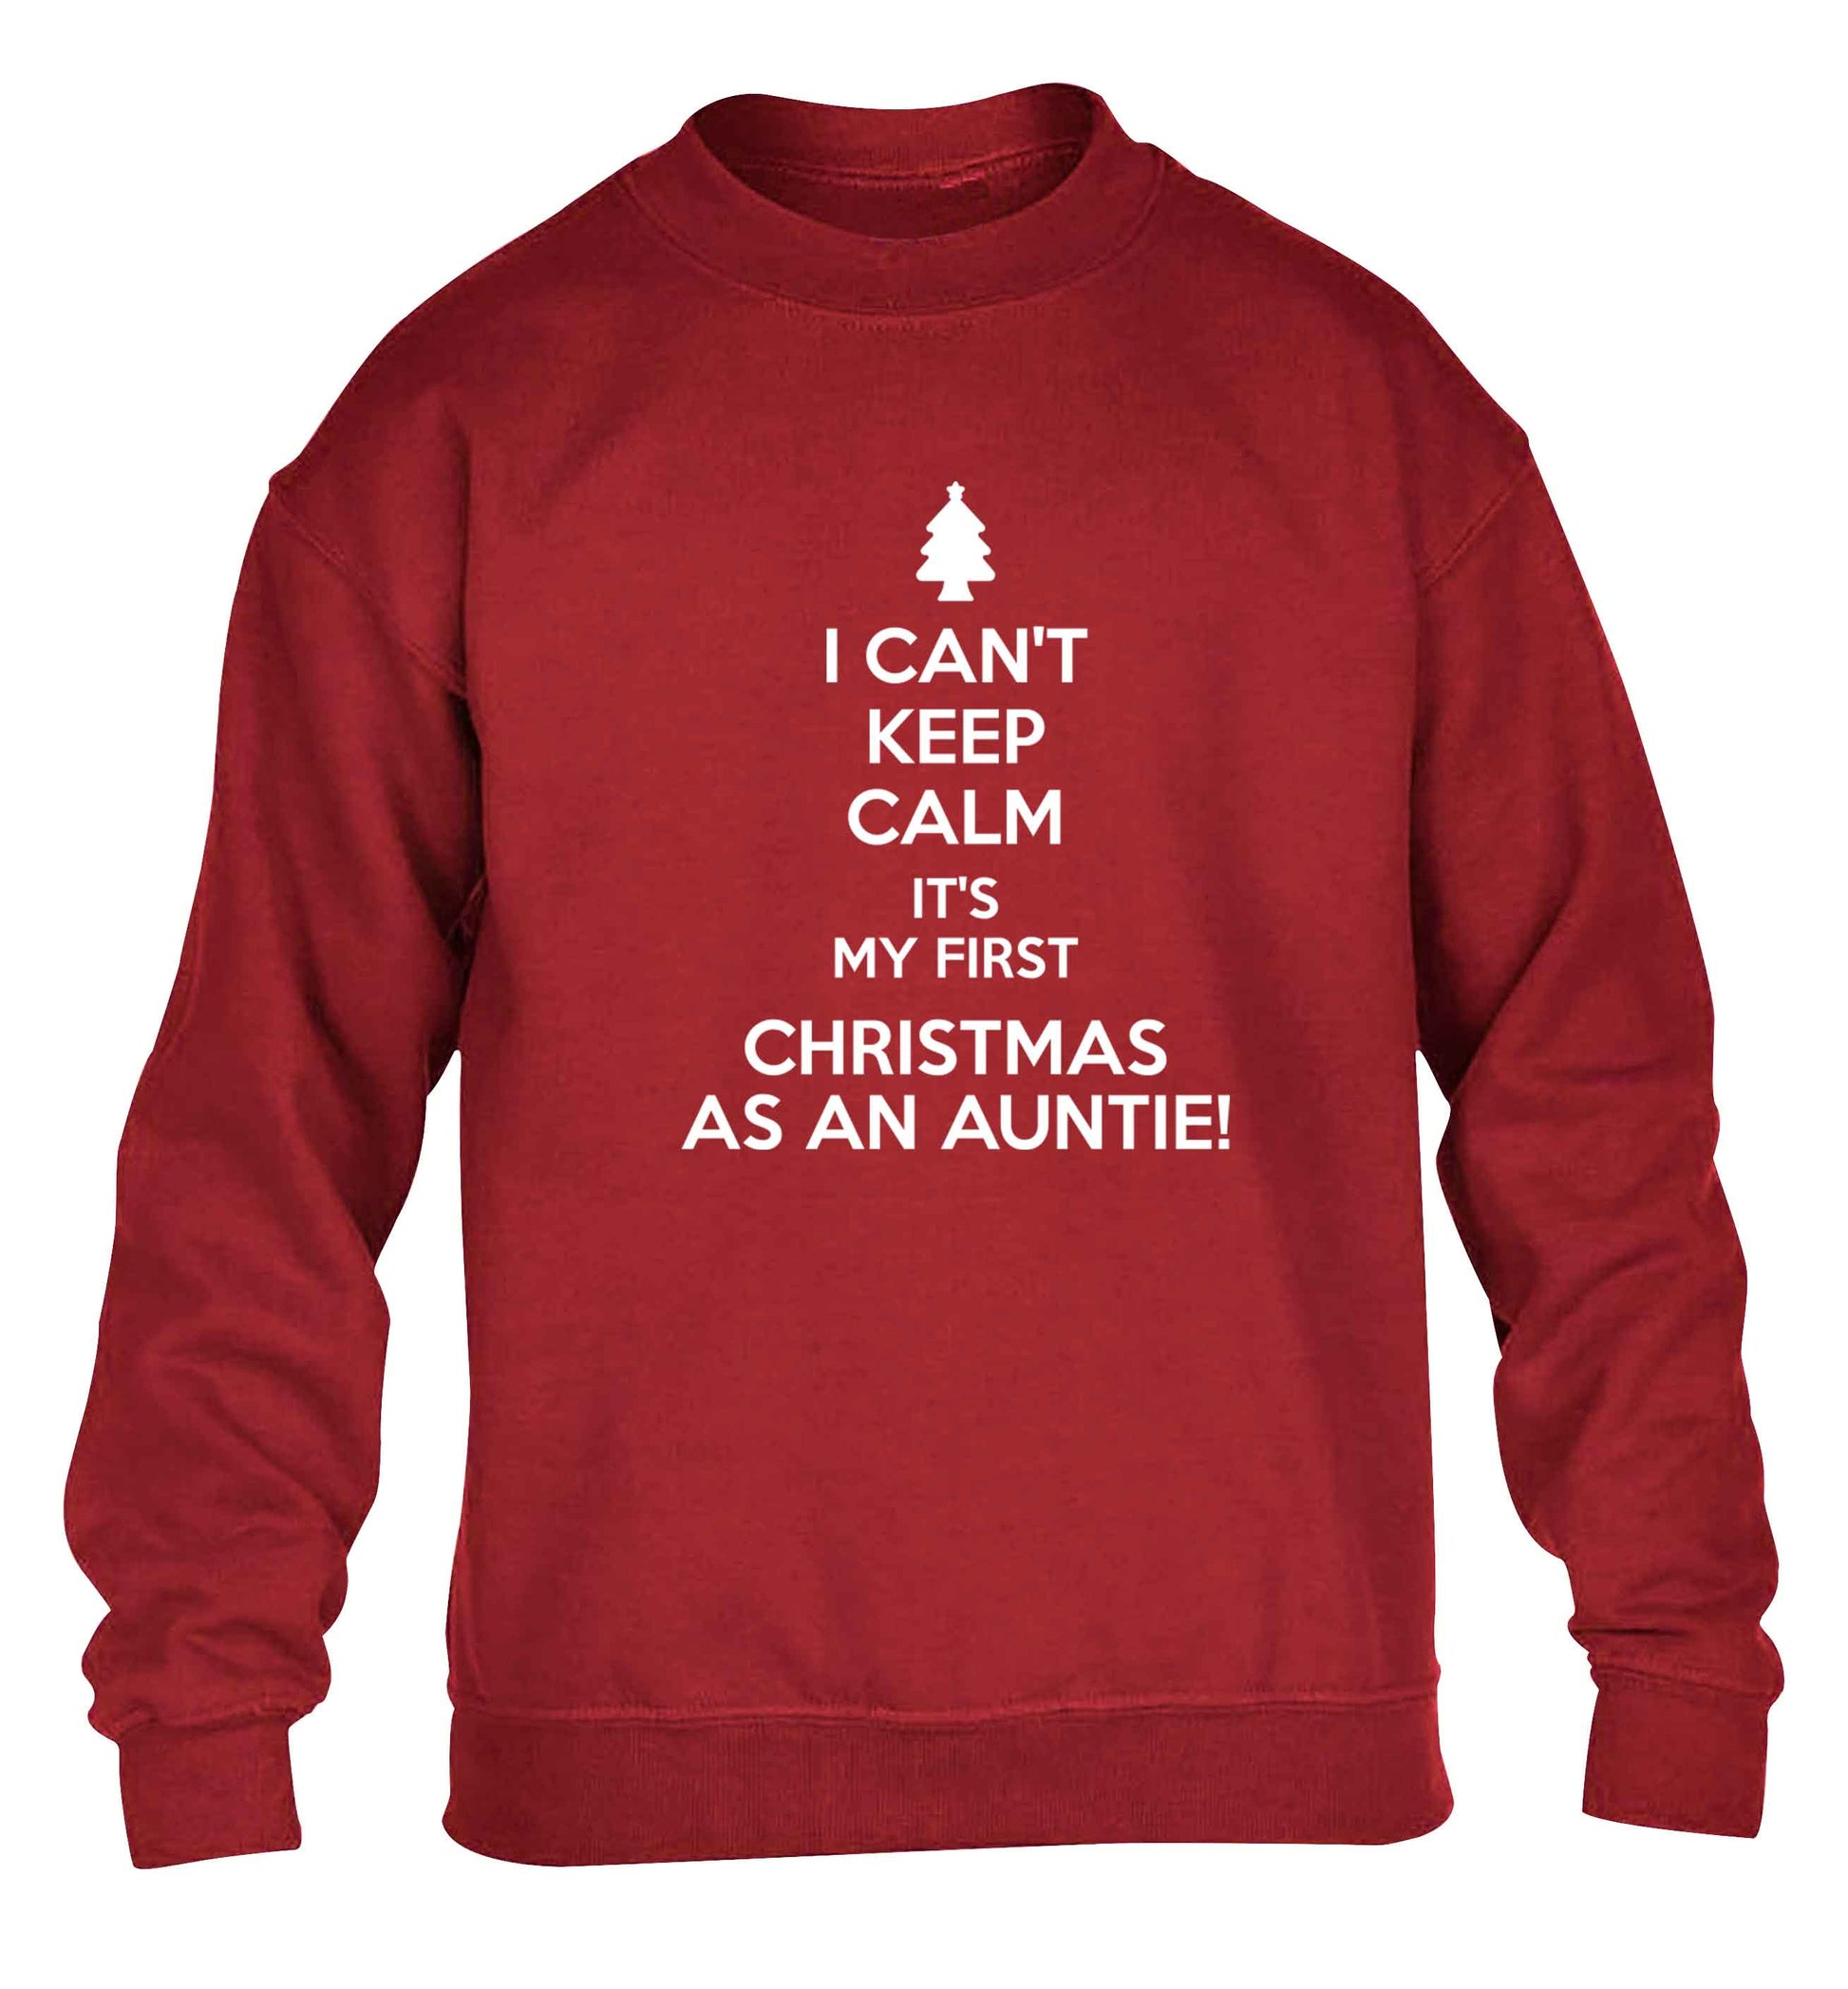 I can't keep calm it's my first Christmas as an auntie! children's grey sweater 12-13 Years